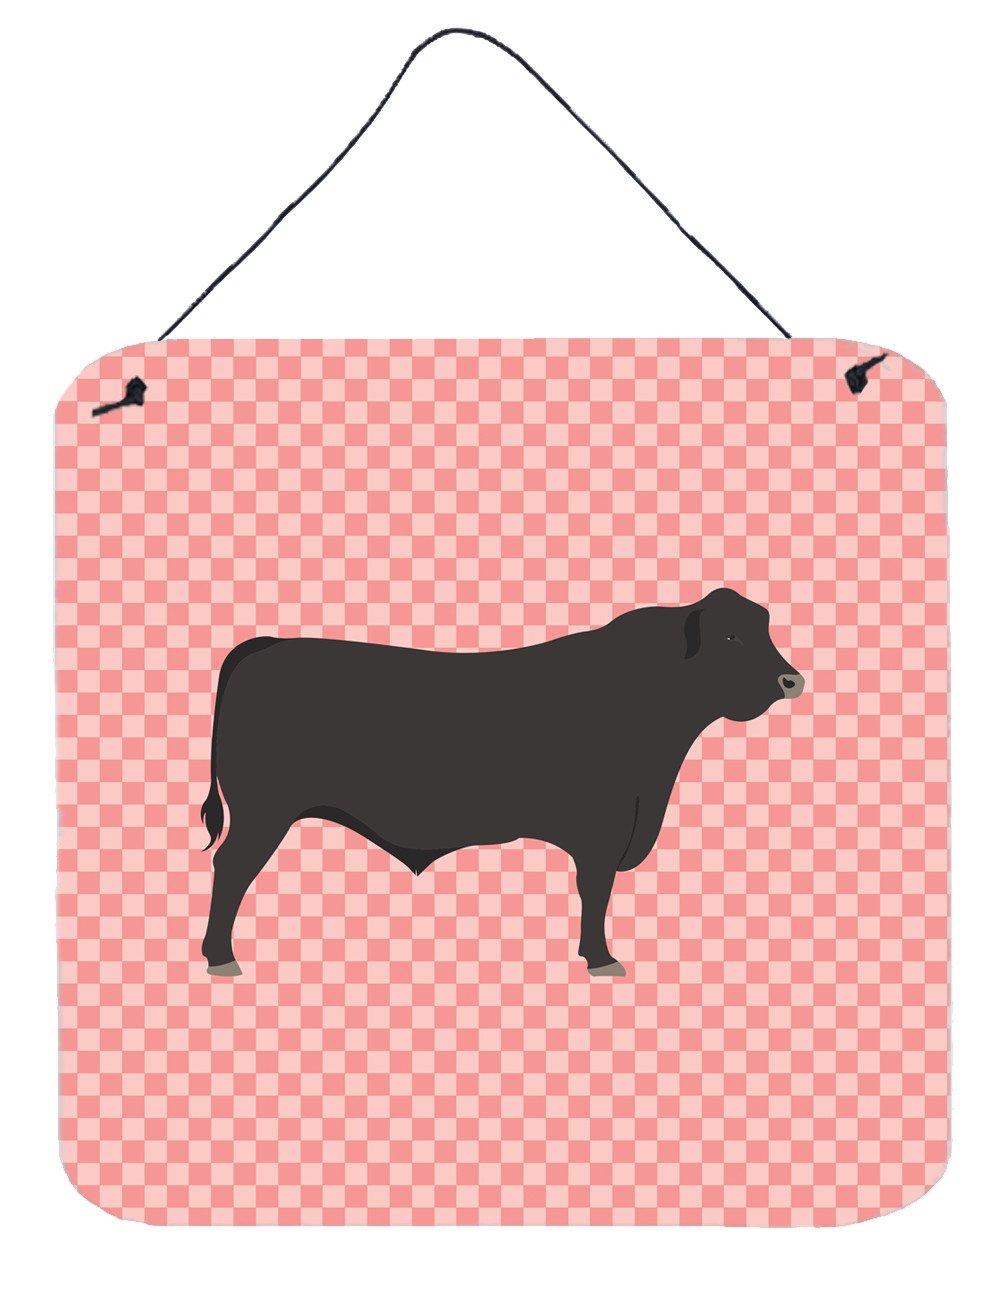 Black Angus Cow Pink Check Wall or Door Hanging Prints BB7828DS66 by Caroline's Treasures